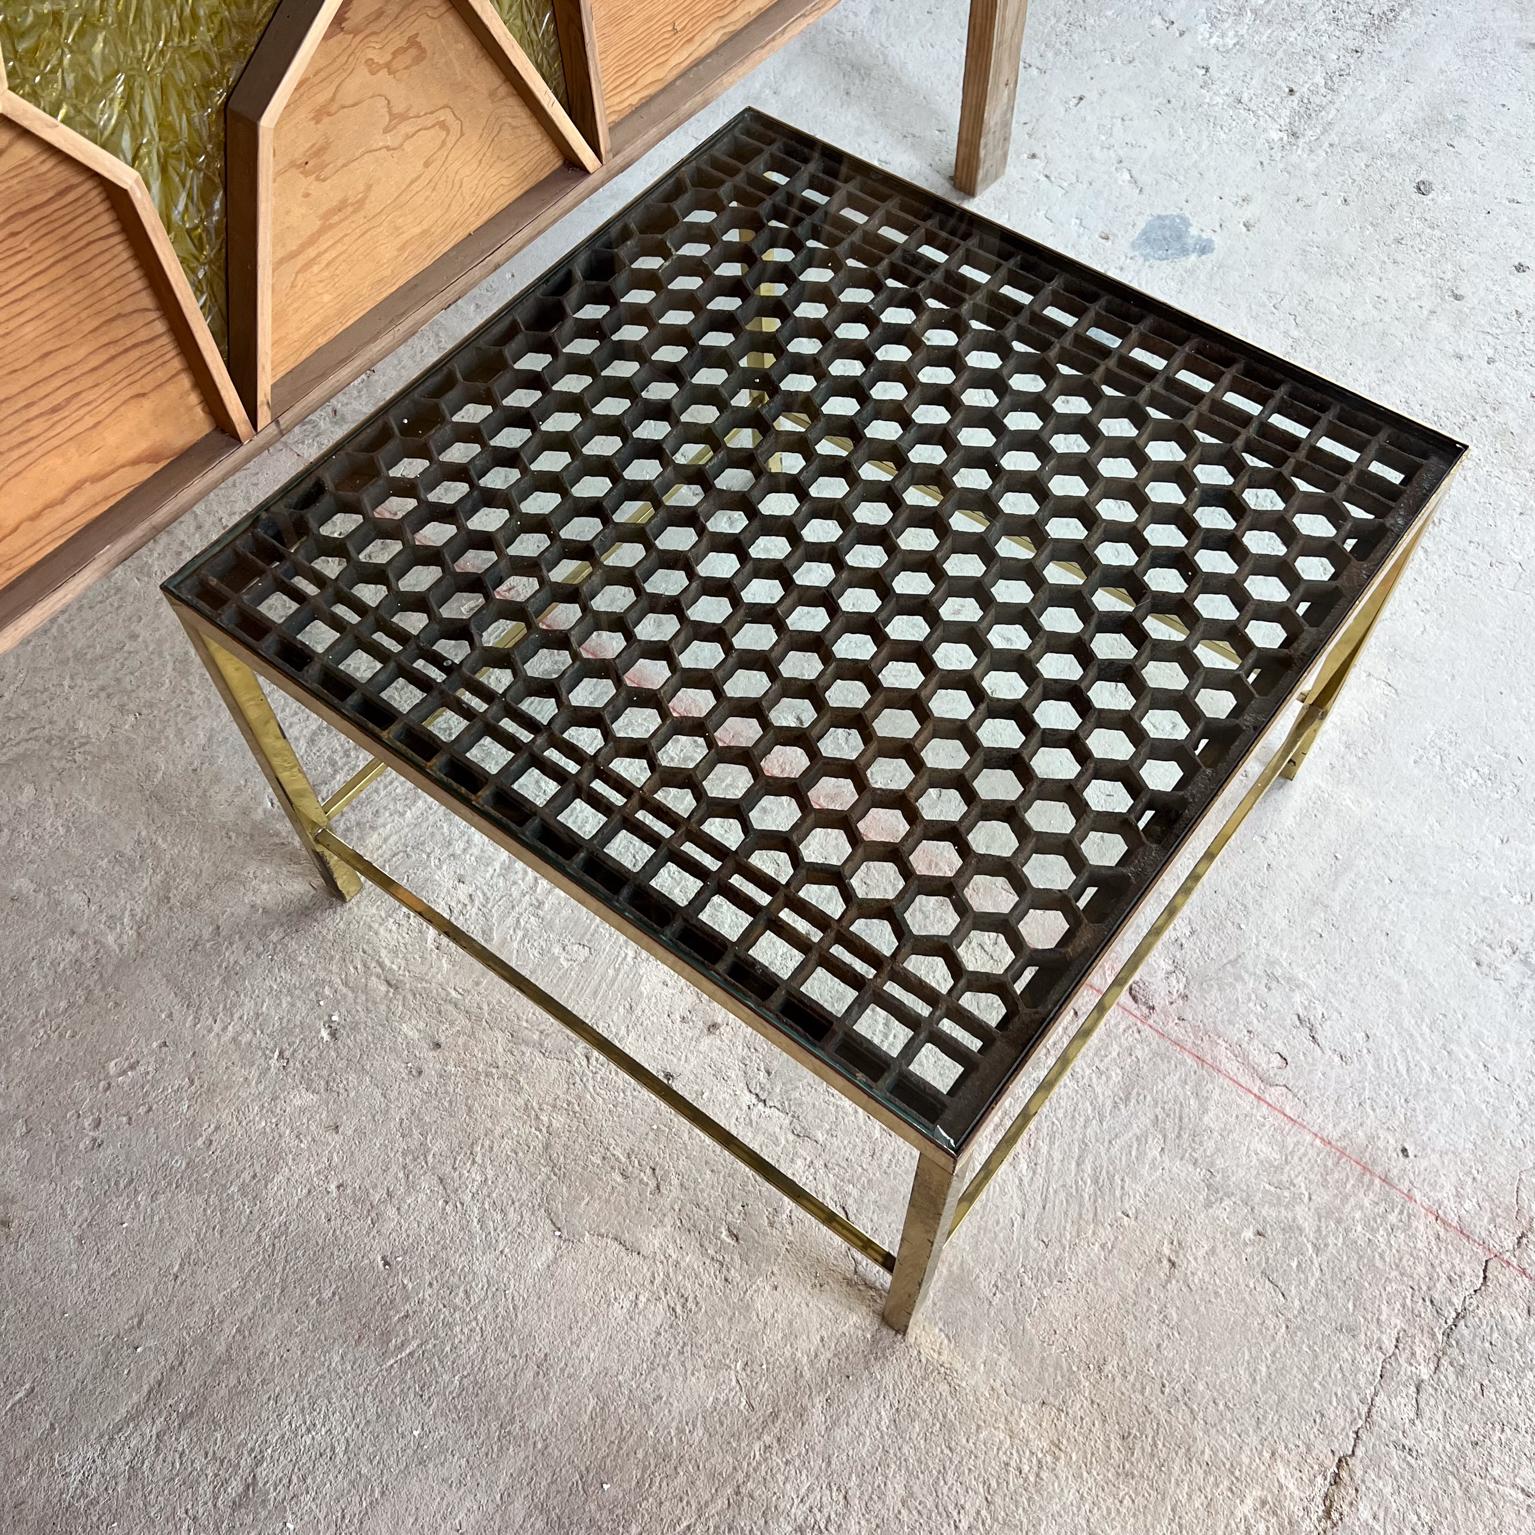 1960s Sensational Custom Side Table Brass and Iron Grate For Sale 1